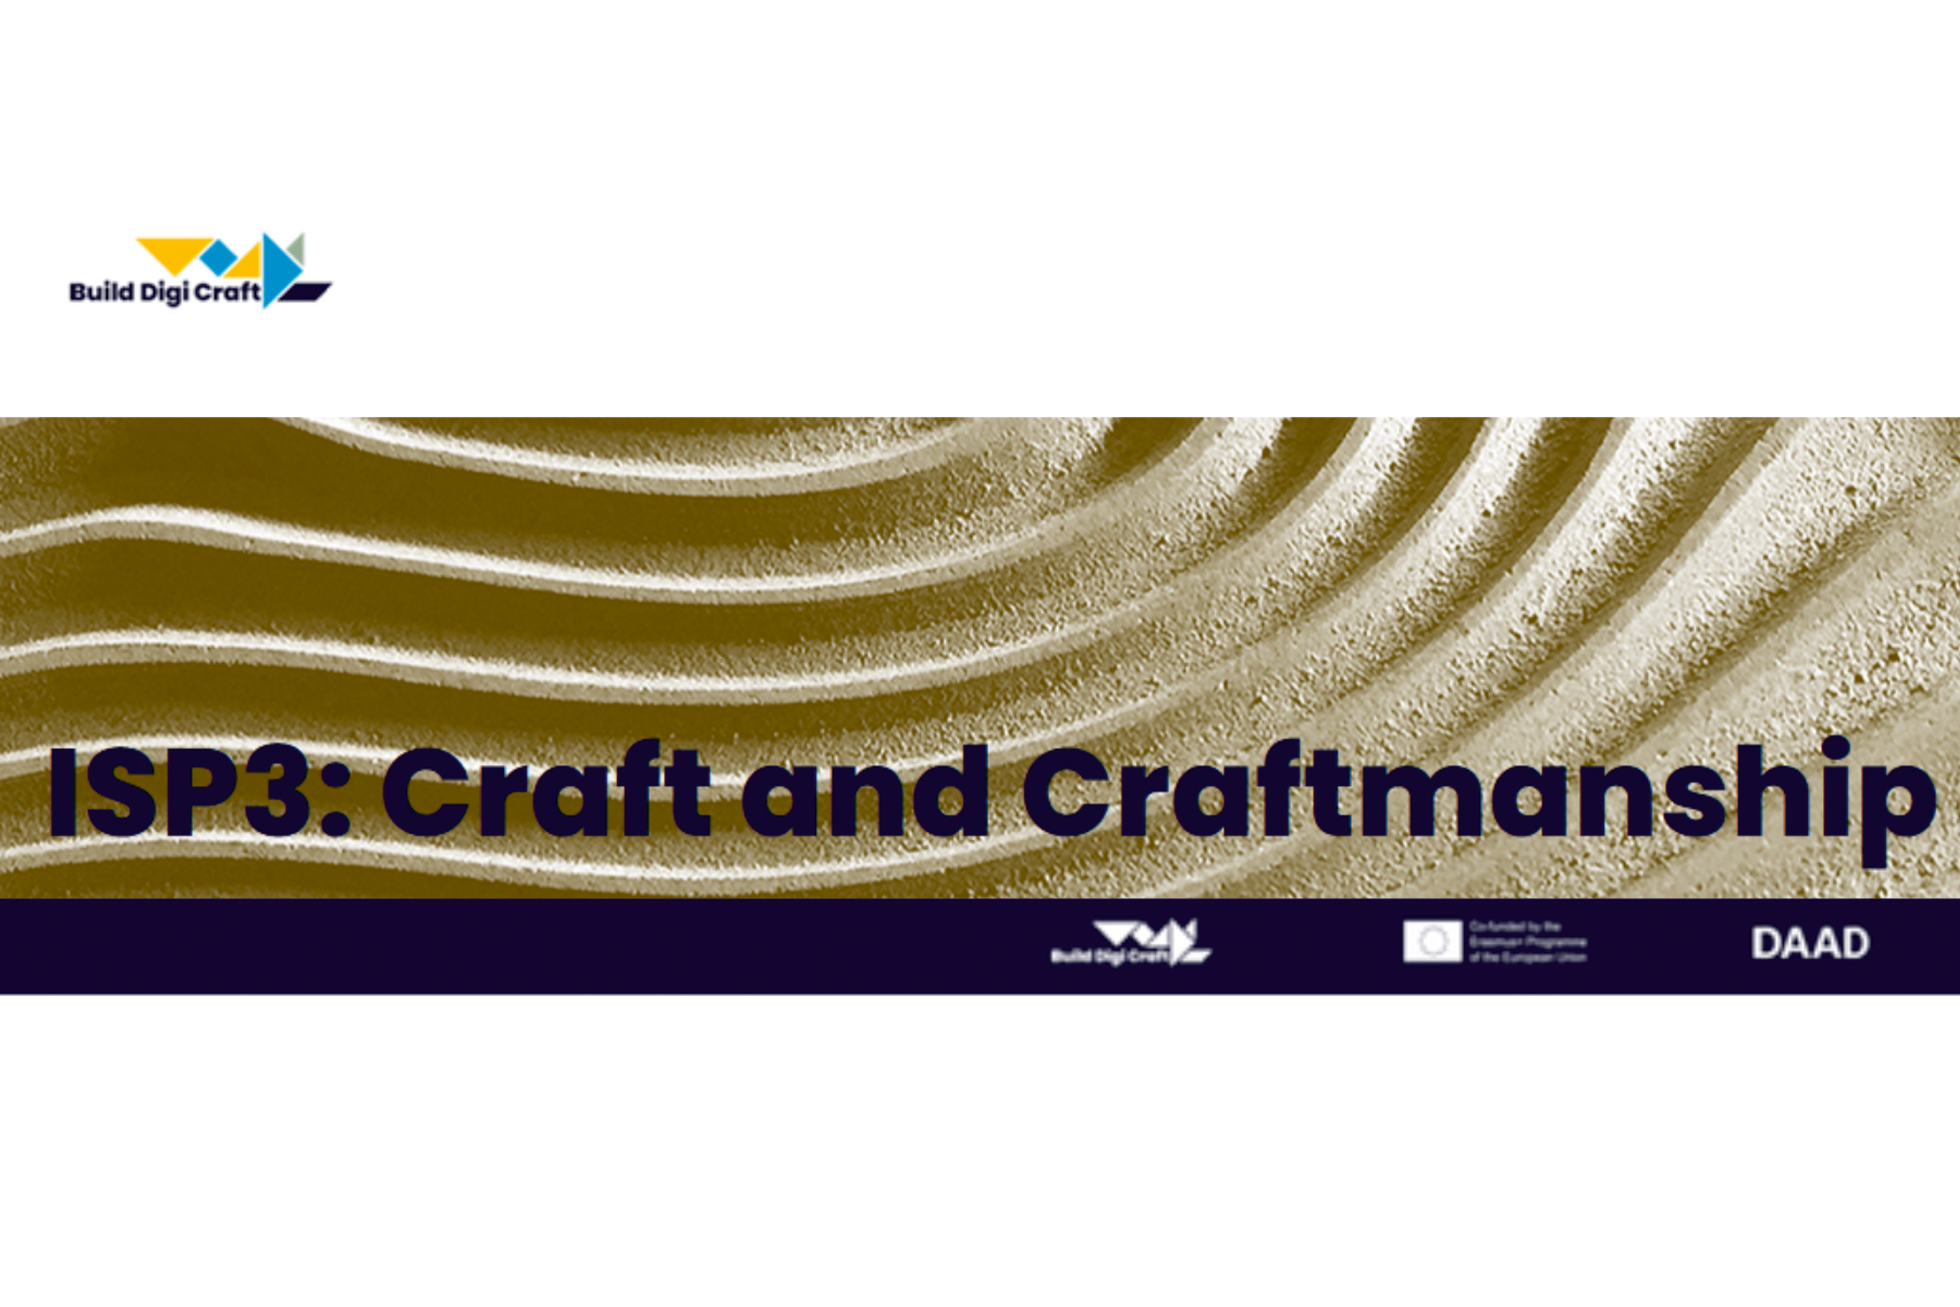 Poster promoting the BuildDigiCraft